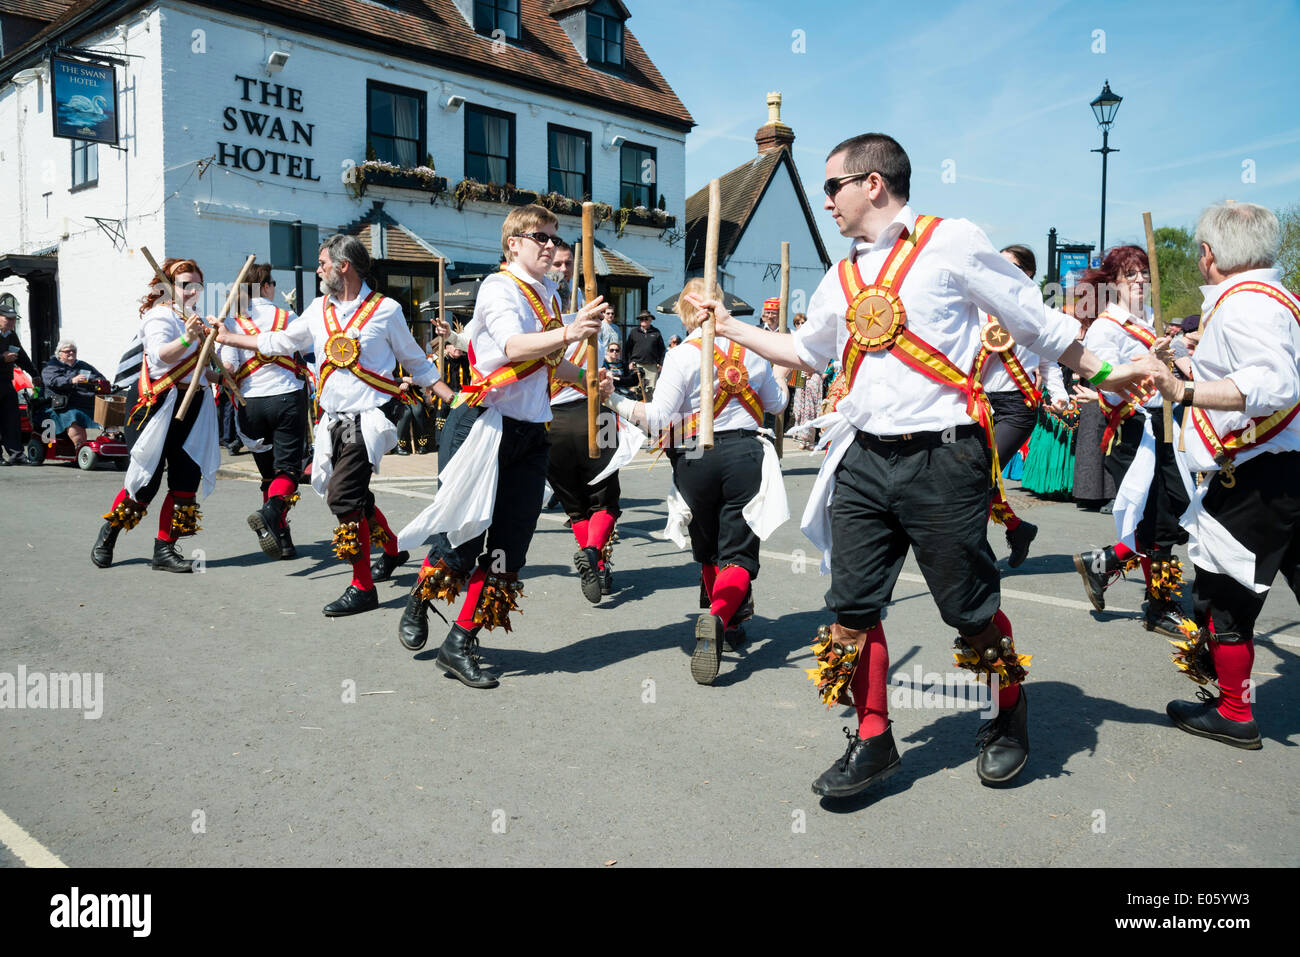 Upton upon Severn, Worcestershire, UK. 3rd May 2014 Folk dancers entertain people on a lovely sunny day. Mixed male & female morris dancers at Upton upon Severn, Worcestershire, UK. Credit:  Robert Convery/Alamy Live News Stock Photo